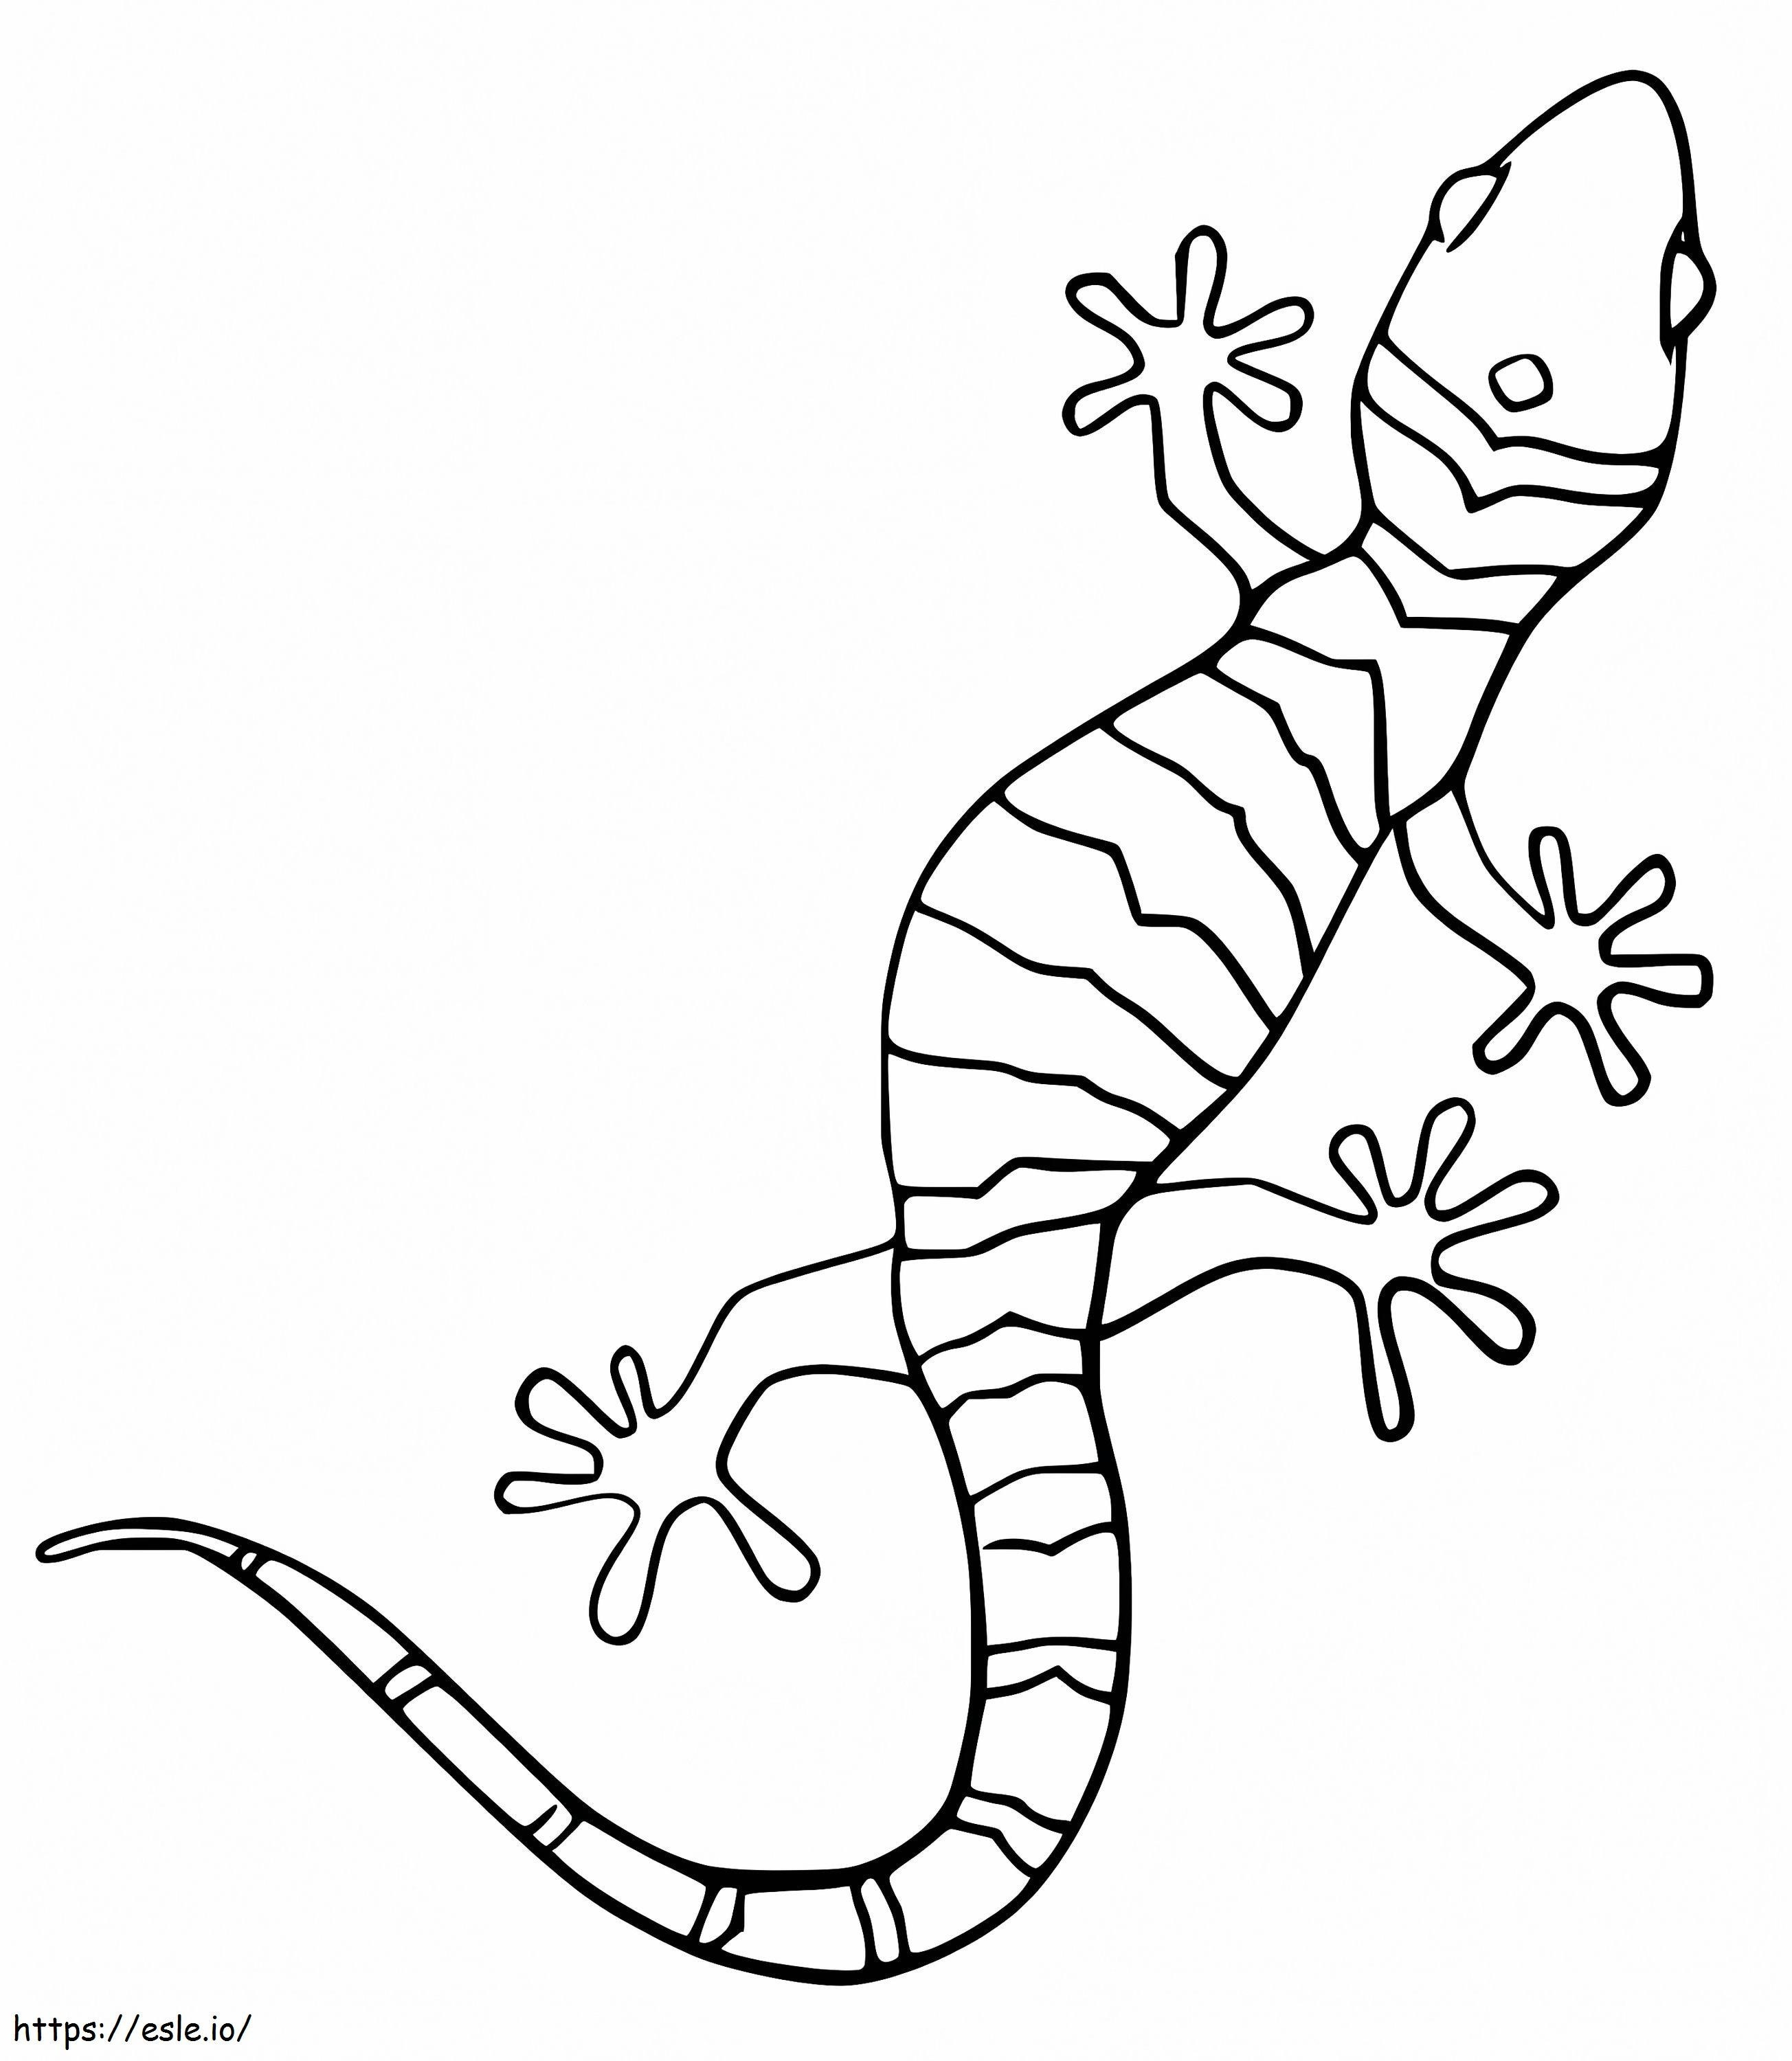 Crawling Gecko coloring page